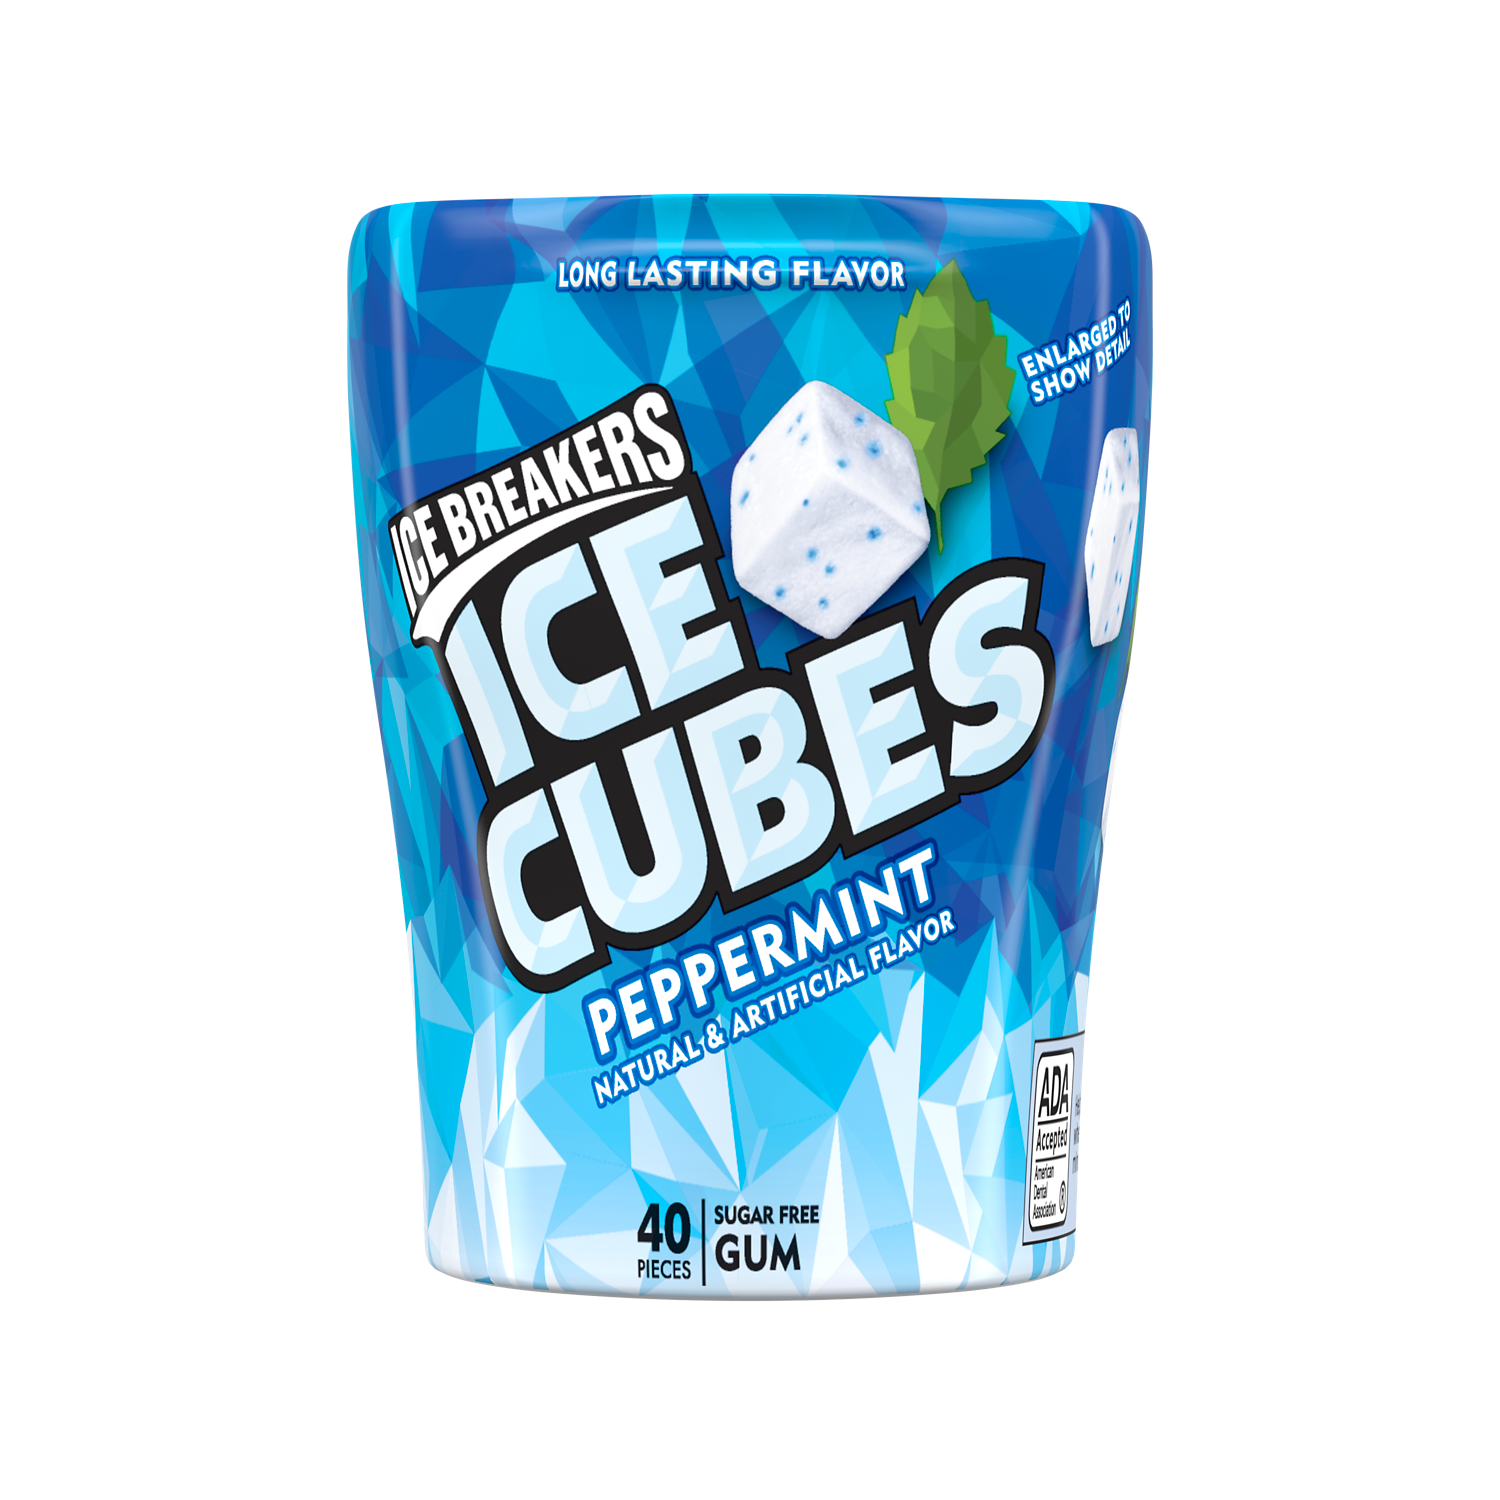 ICE BREAKERS ICE CUBES Peppermint Sugar Free Gum, 3.24 oz bottle, 40 pieces - Front of Package